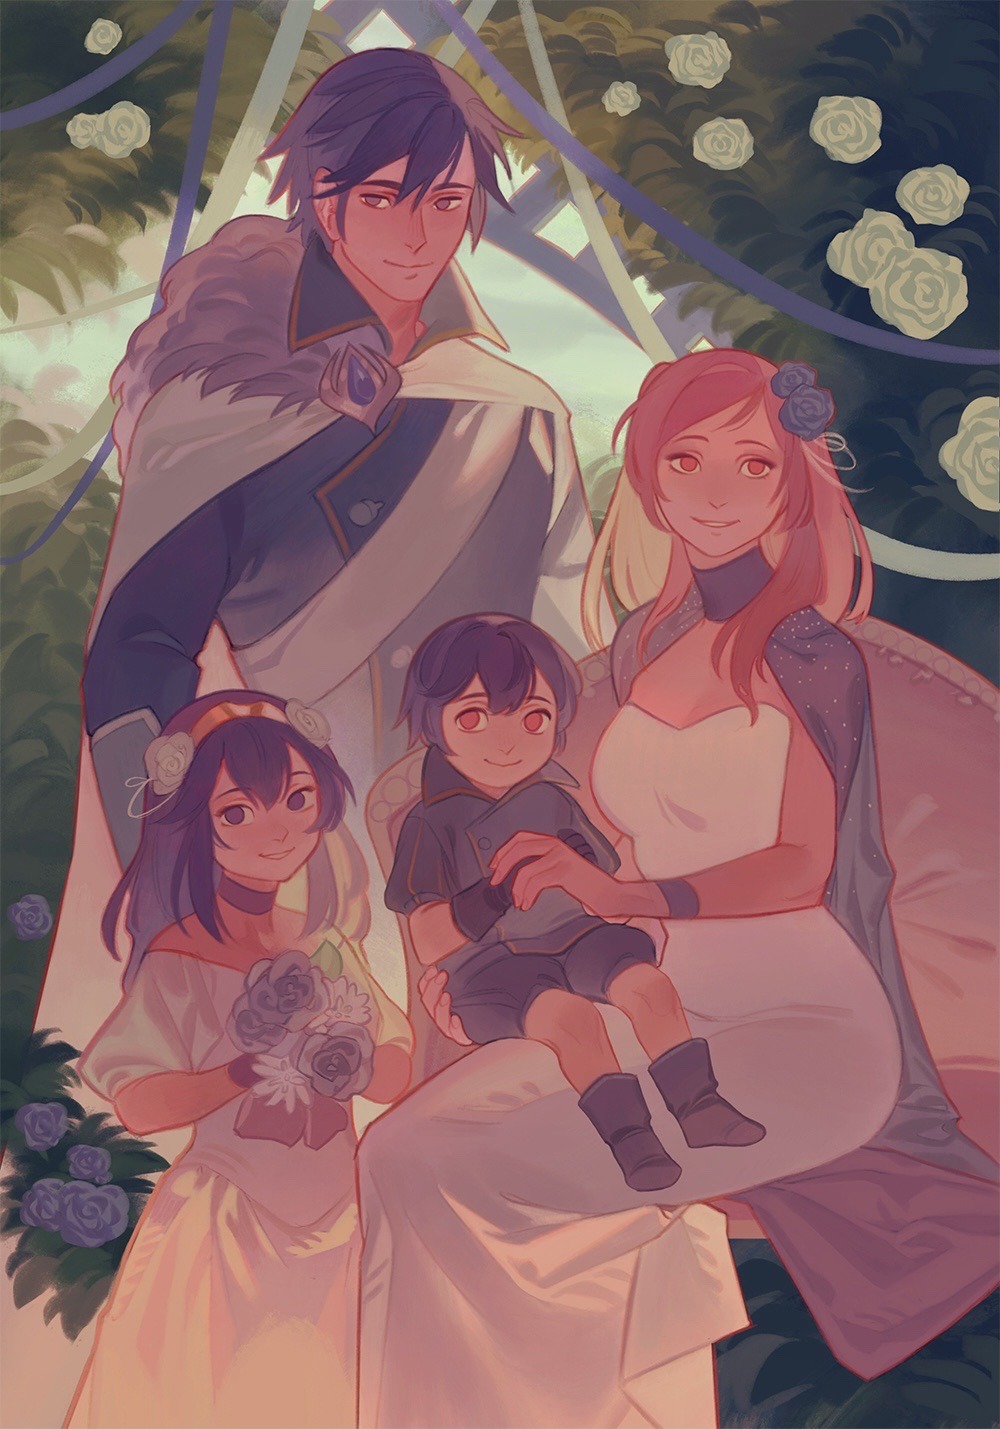 2boys 2girls alternate_costume bouquet brother_and_sister cape chrom_(fire_emblem) dress family family_portrait father_and_daughter father_and_son fire_emblem fire_emblem_awakening flower formal gloves hair_flower hair_ornament highres hollyfig husband_and_wife looking_at_viewer lucina_(fire_emblem) morgan_(fire_emblem) morgan_(fire_emblem)_(male) mother_and_daughter mother_and_son multiple_boys multiple_girls robin_(fire_emblem) robin_(fire_emblem)_(female) siblings sitting sitting_on_lap sitting_on_person smile tiara twintails younger